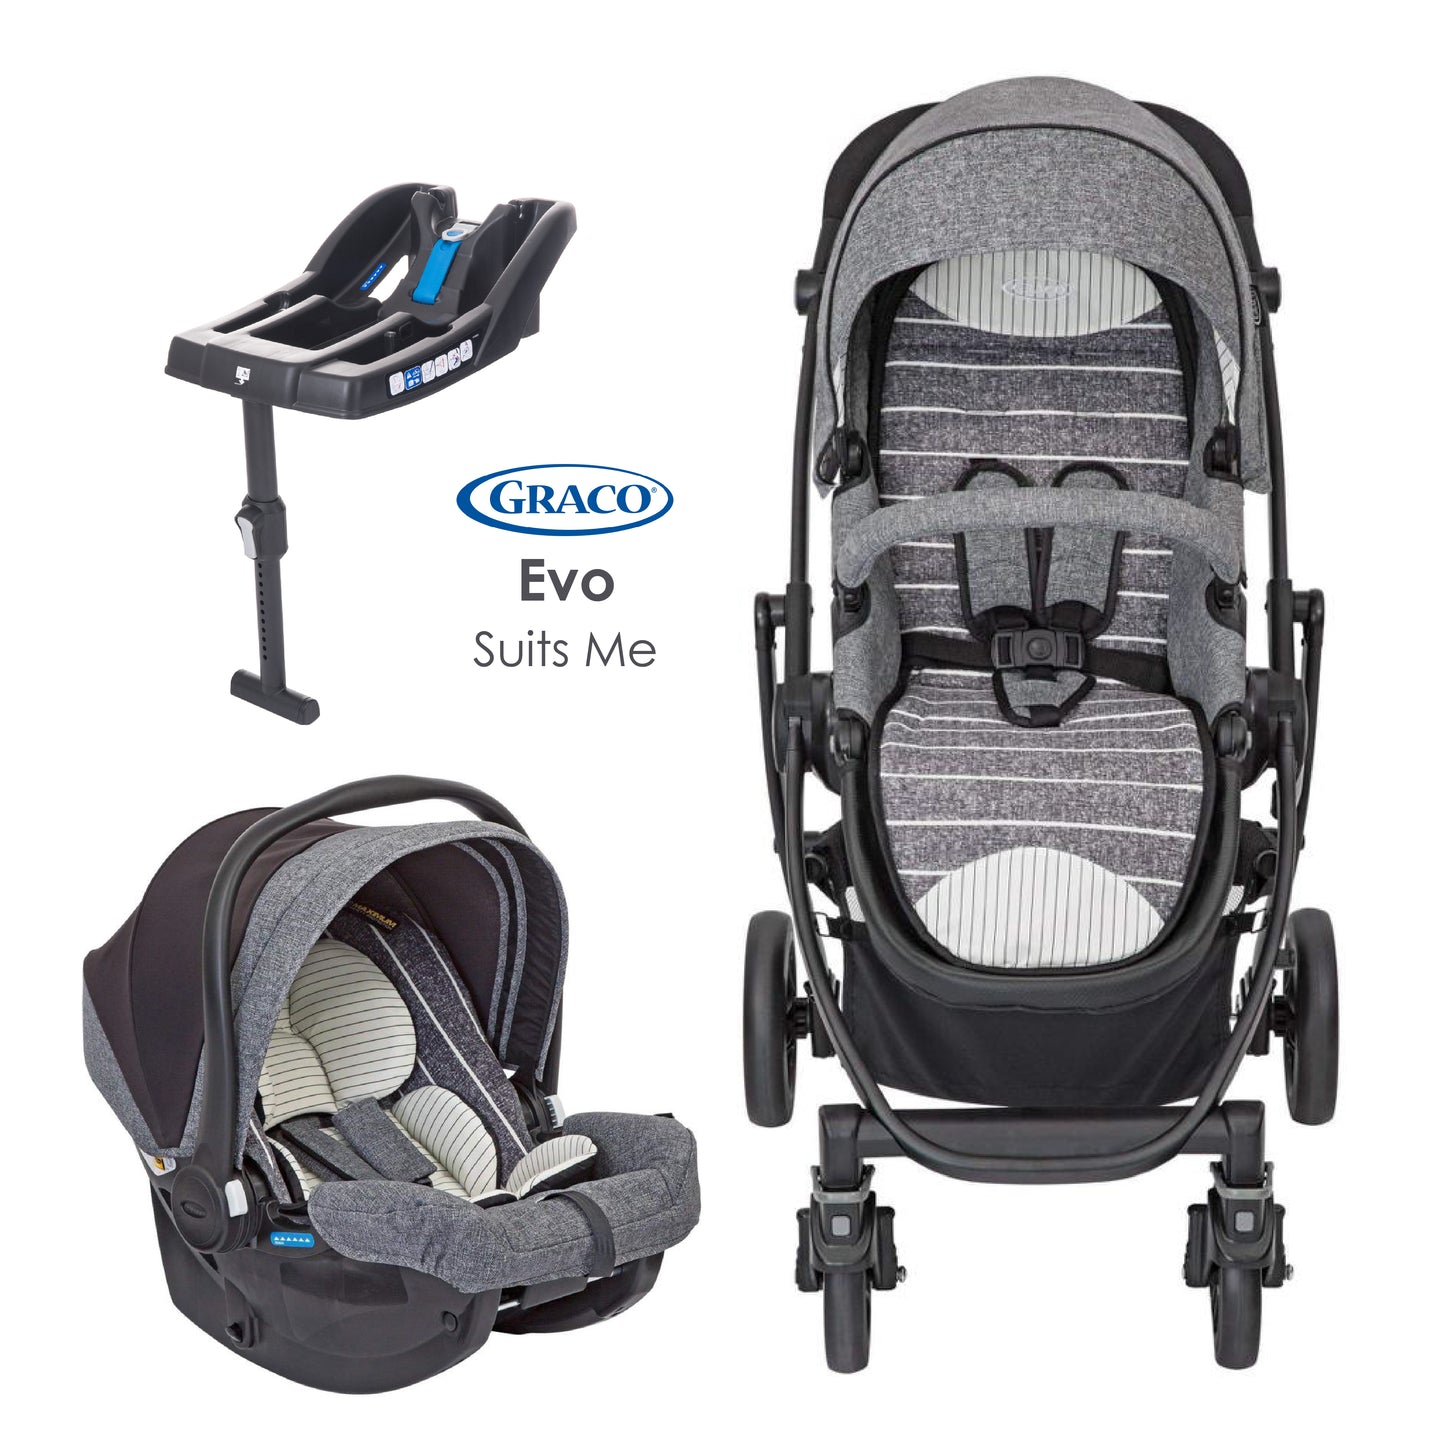 Graco - Evo Suits Me Travel System